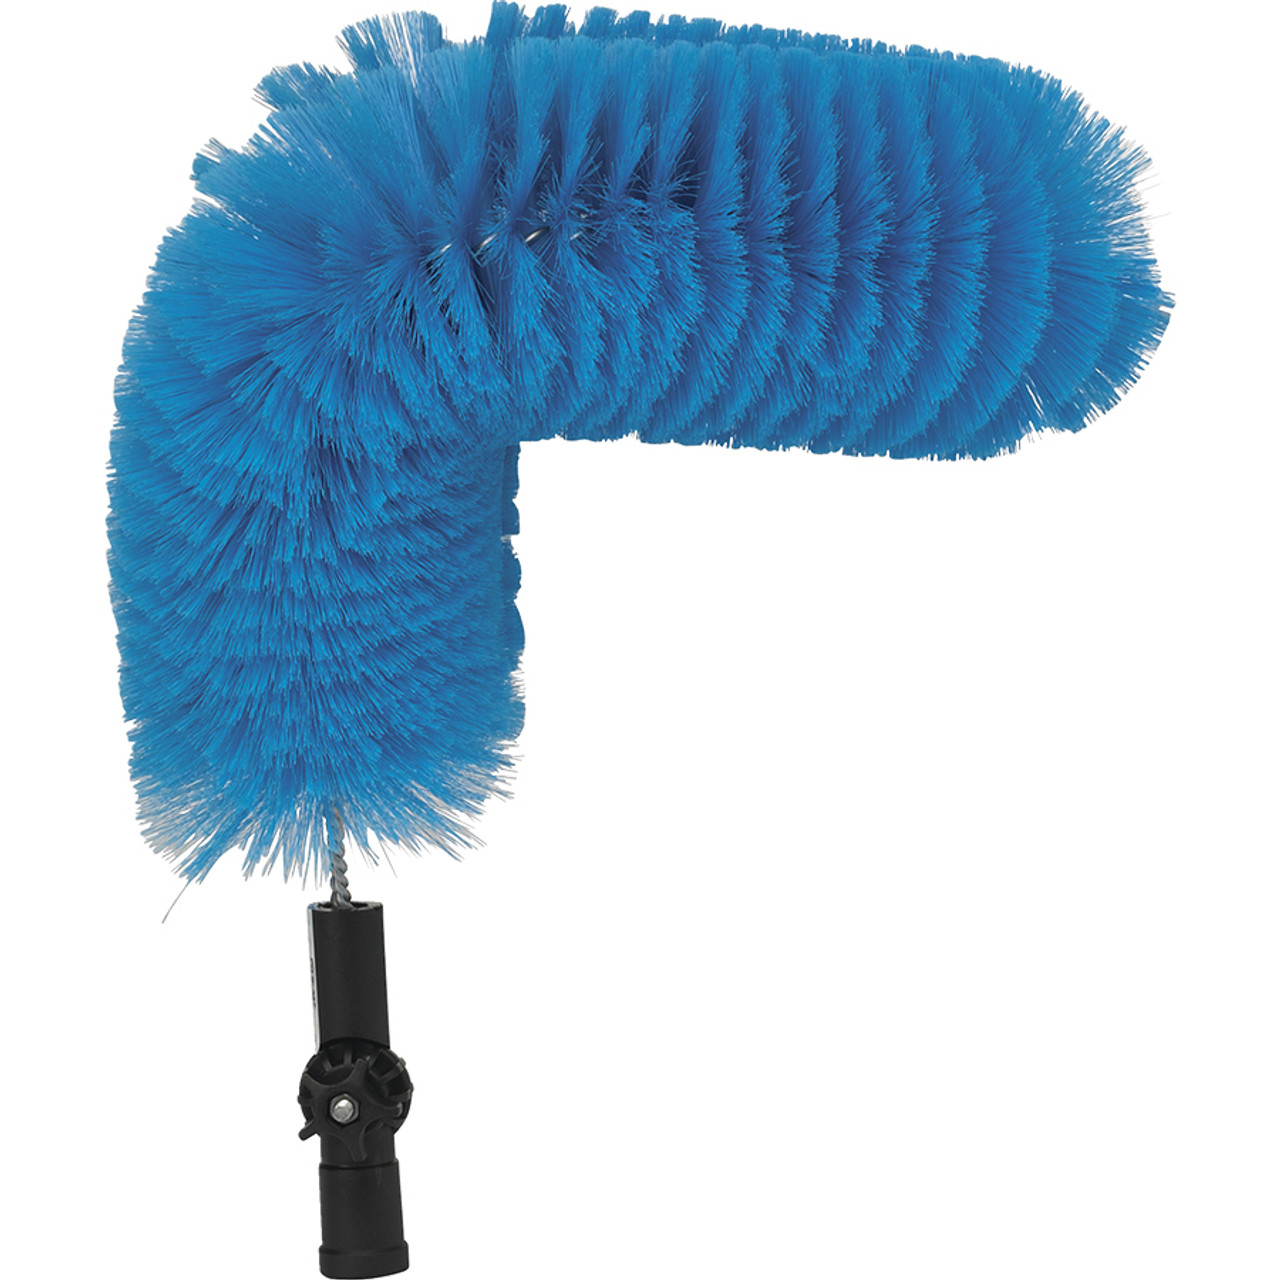 VAVSEA Electric Cleaning Brush,300/200RPM Dual Speed Conversion